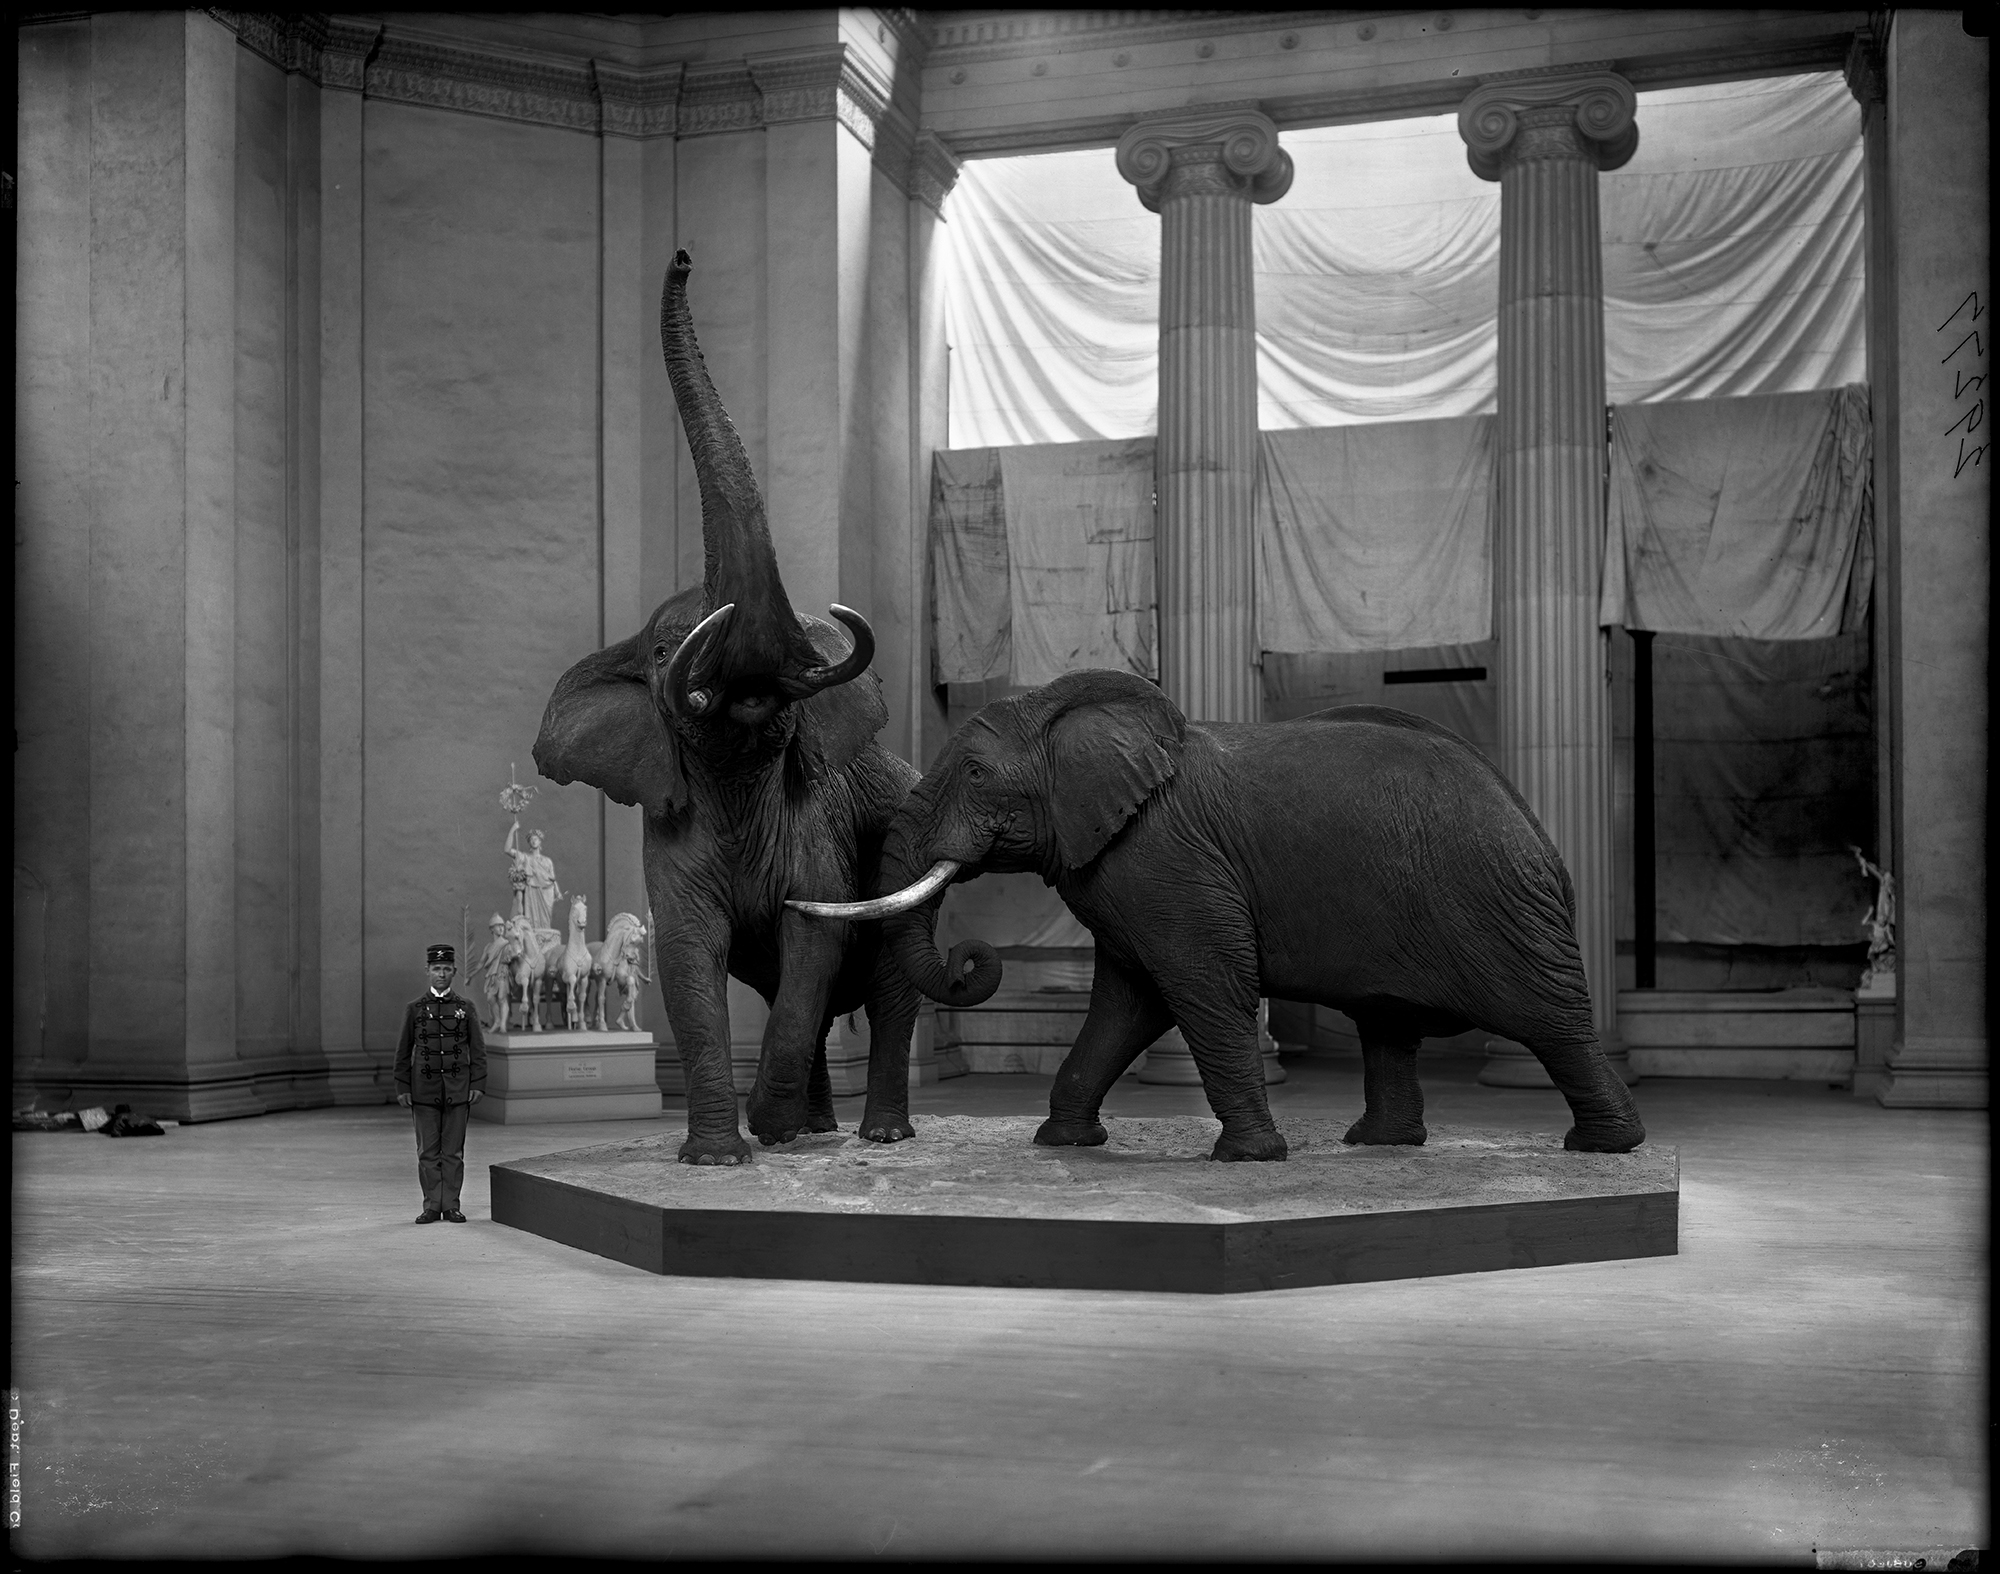 Two African elephants (group taxidermy). Security guard in uniform stands on left side. Background shows columns draped with large white sheets. White plaster miniature sculpture from the World's Columbian Exposition, "Harvest," by Mr. M. A. Waagen. Columbian Rotunda of Field Columbian Museum, Jackson Park, Chicago. Taxidermy by Carl Akeley. Left elephants with two tusks has trunk raised; right elephant has one tusk.